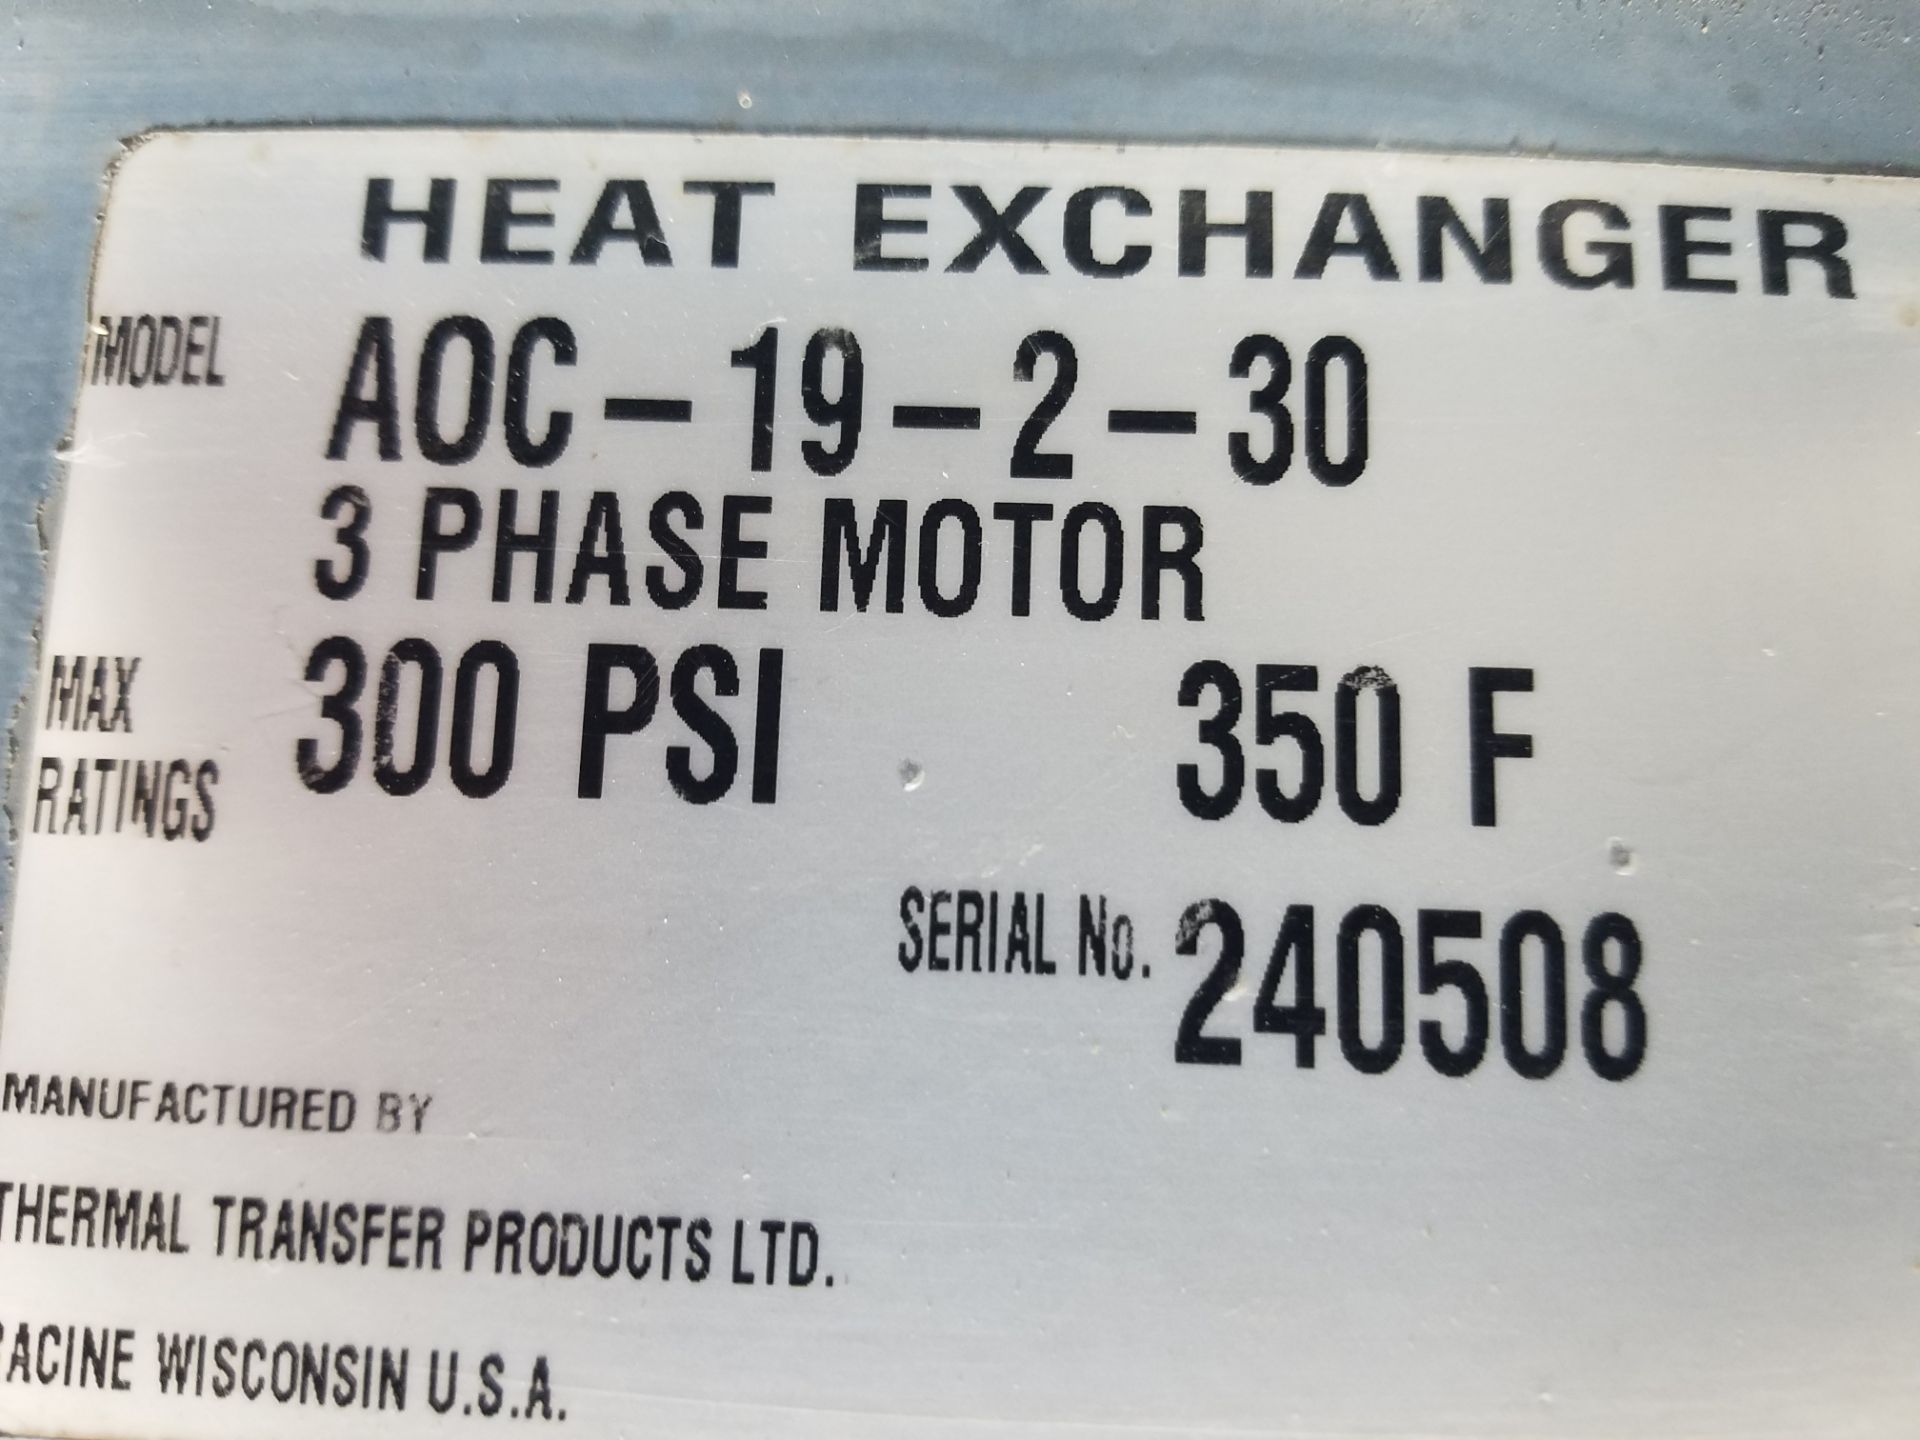 Polypac Heat Exchanger, Model AOC-19-2-30, S/N 240508, Volt 230/460, 3 Phase with 40 hp, 90 Gallon - Image 5 of 5